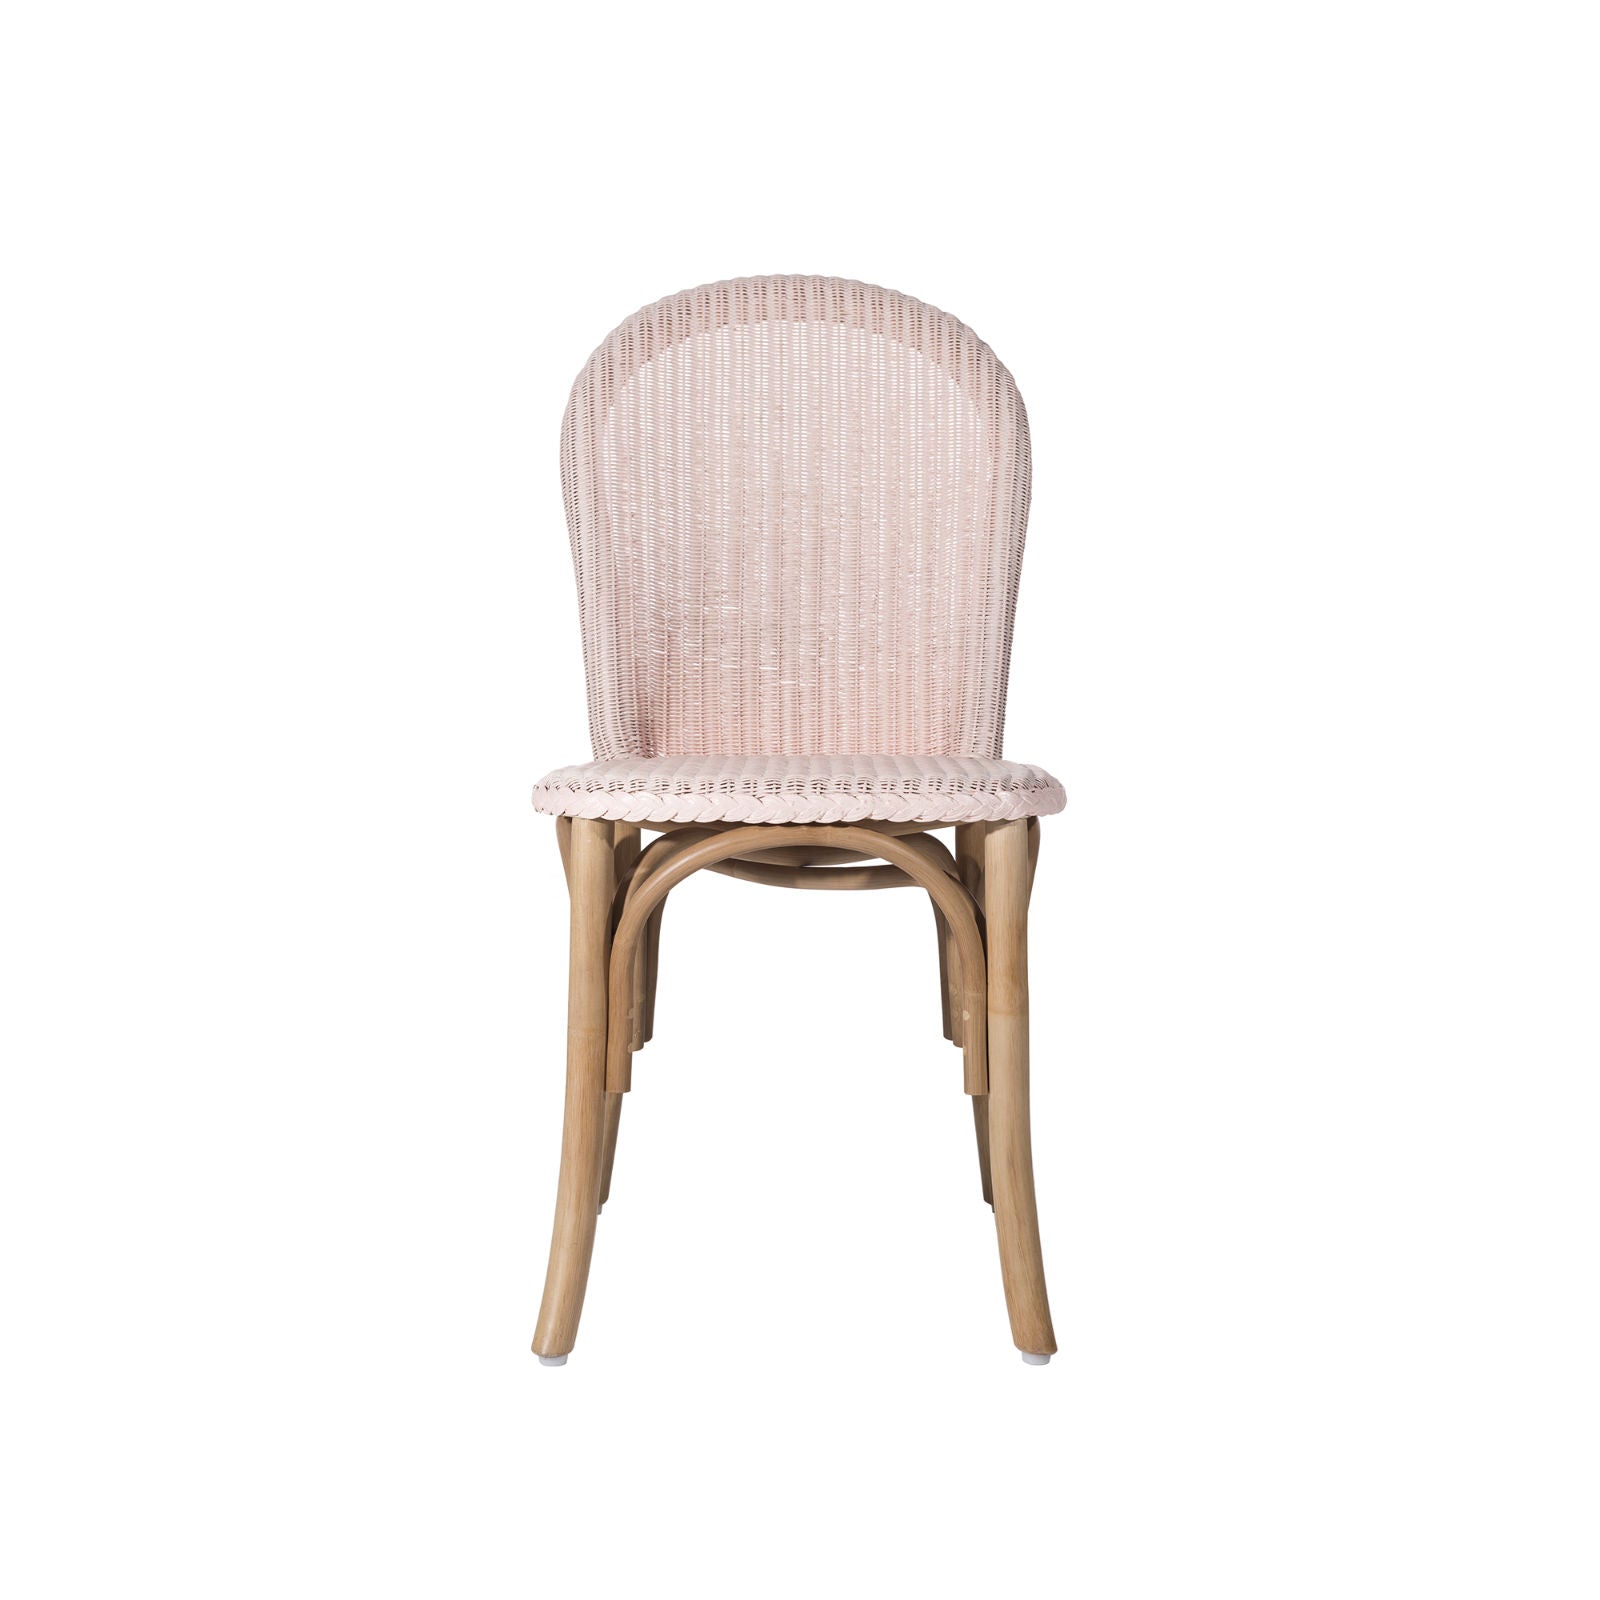 Draper Chair in Pink no. 1